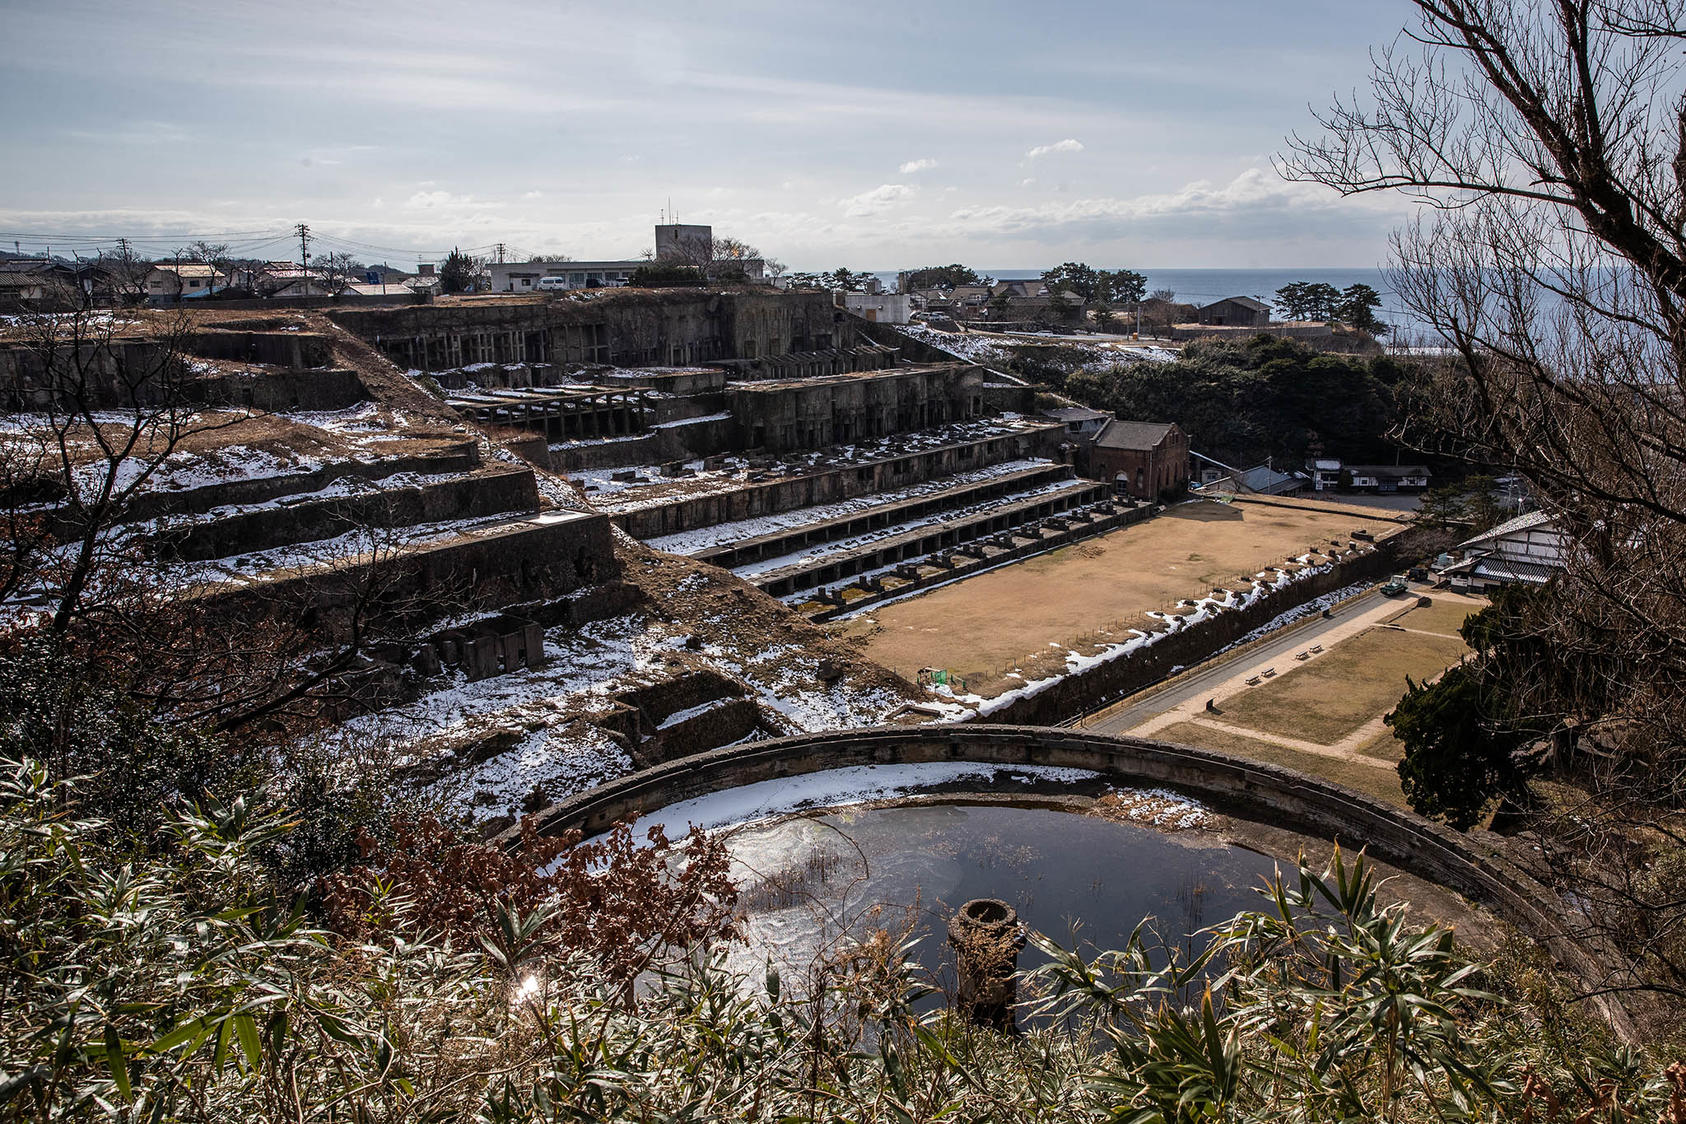 The ruins of the Kitazawa flotation plant on Japan’s Sado Island, Feb. 2022. A bid for a UNESCO World Heritage designation is the latest flash point between Japan and South Korea over Japanese abuses during World War II. (Shiho Fukada/The New York Times)